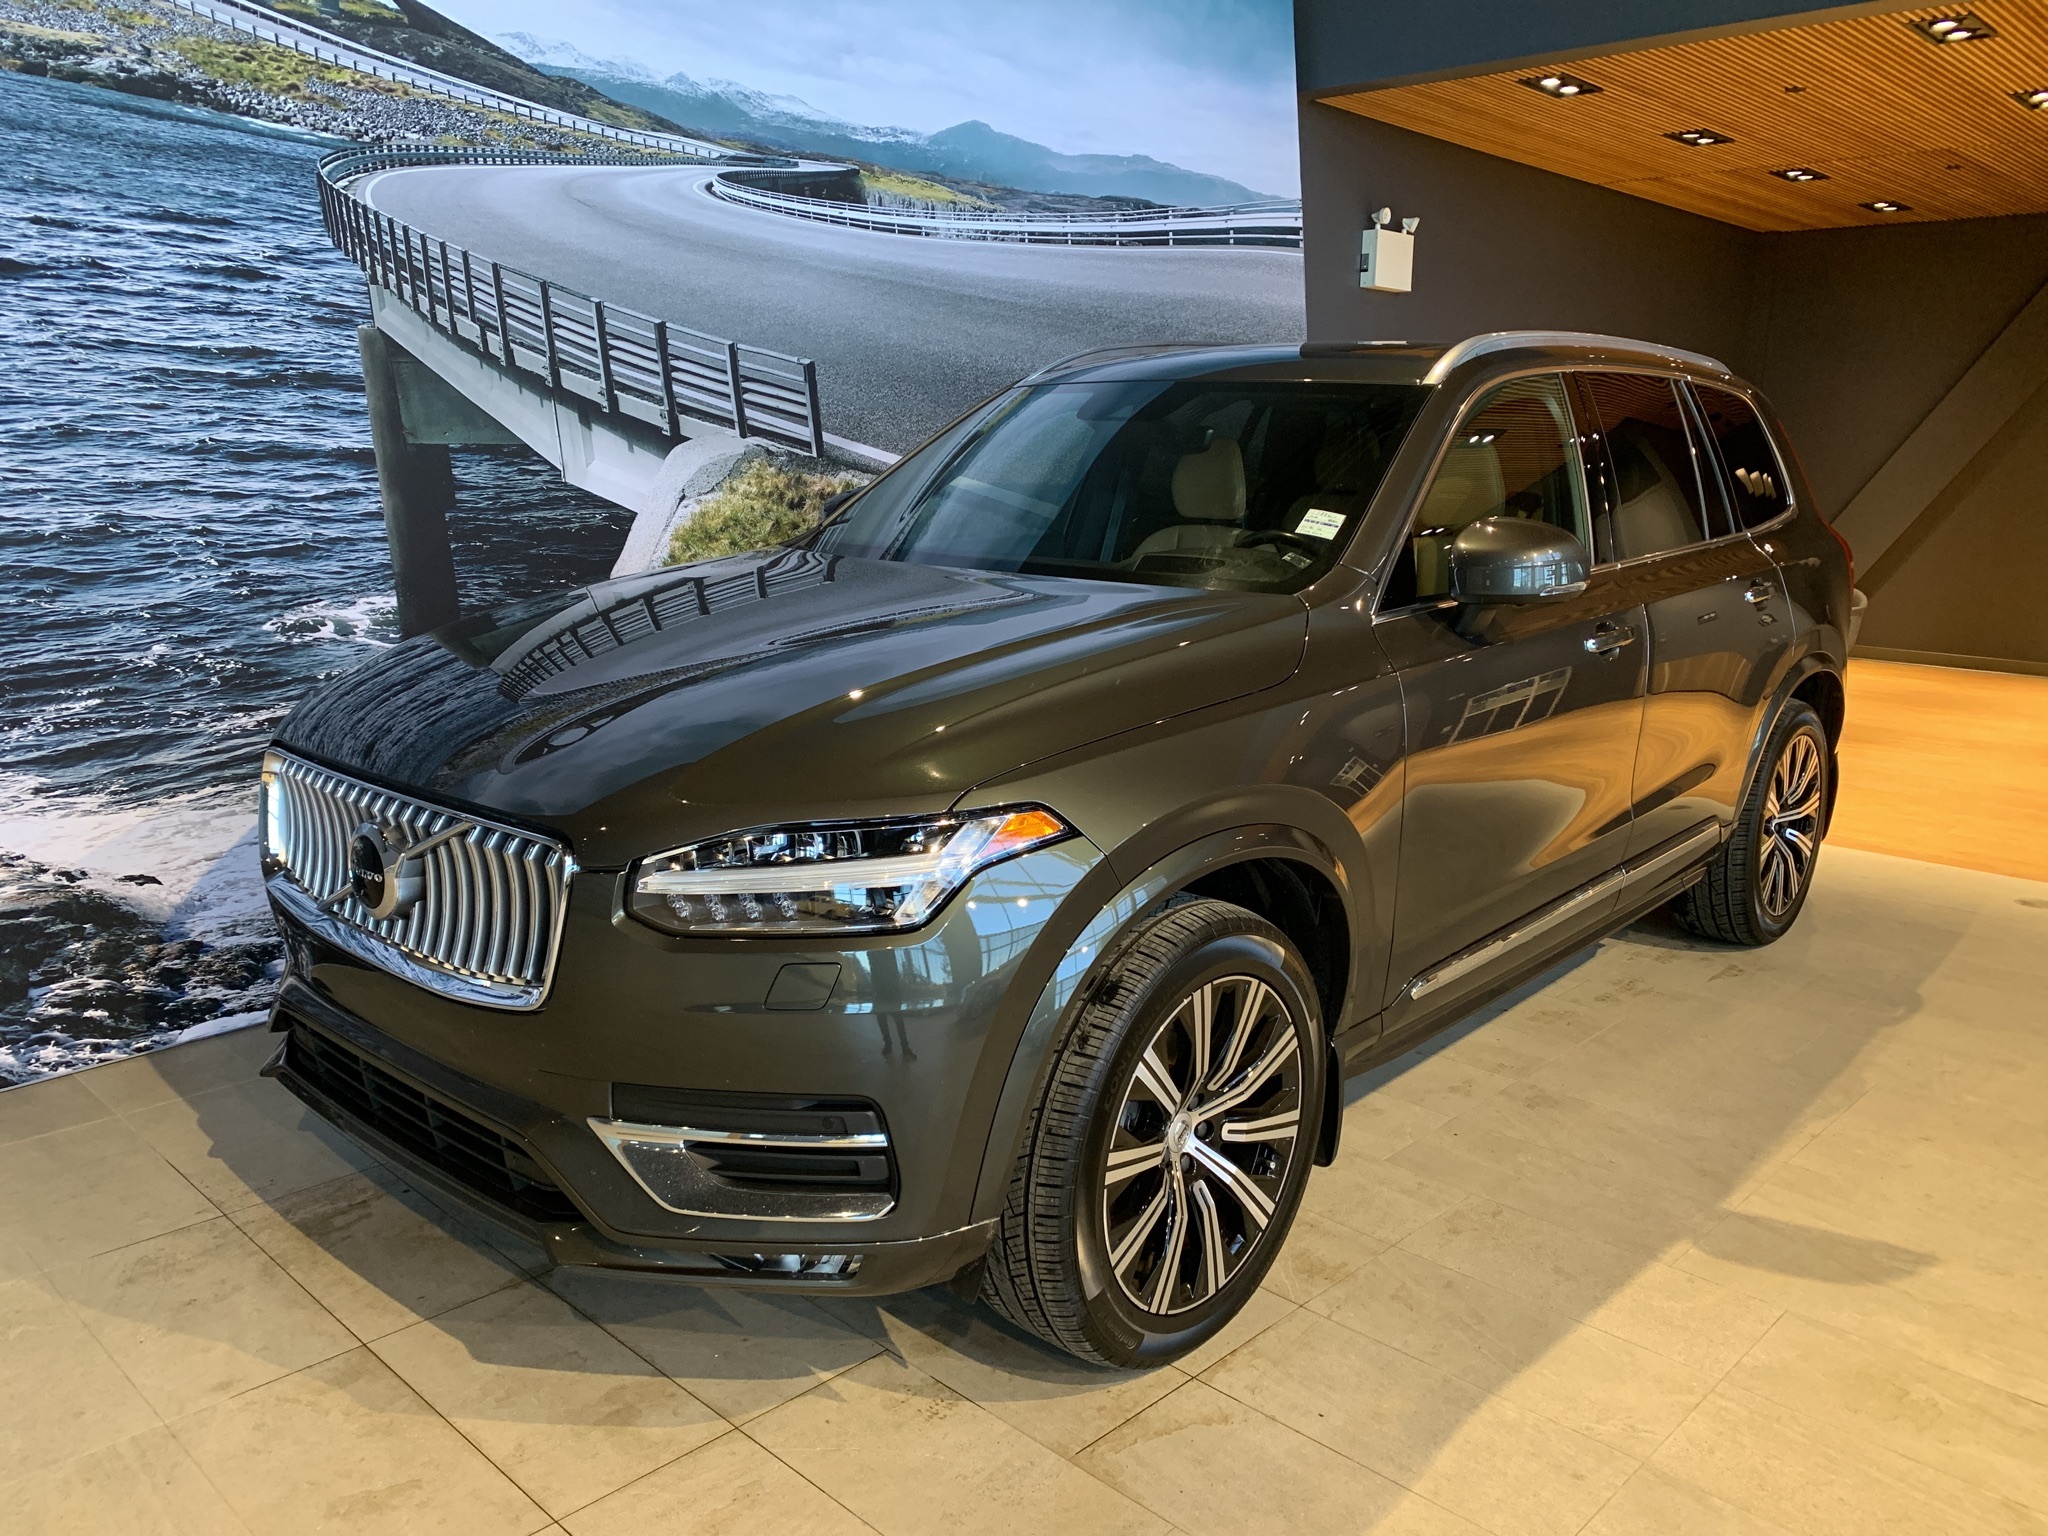 2020 Volvo XC90 T6 AWD Inscription (7-Seat) FROM 3.99%